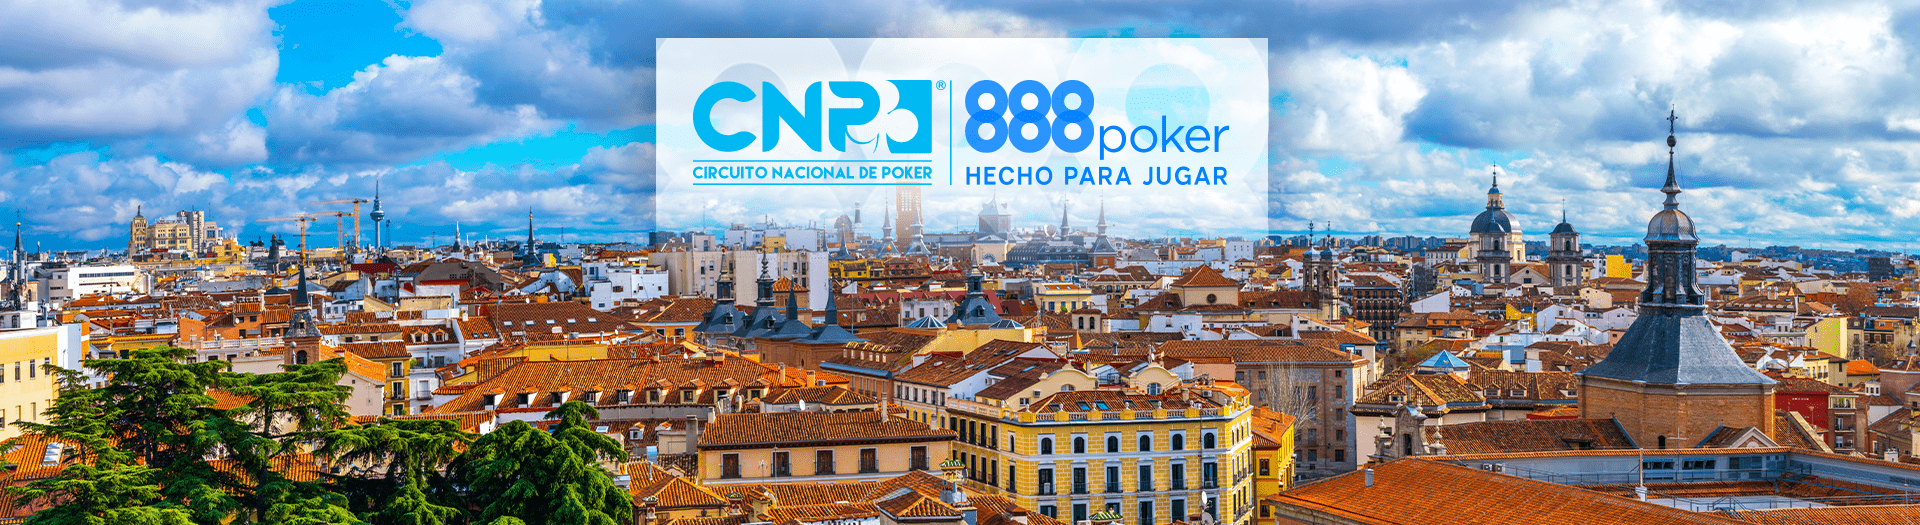 CNP888poker LIVE Madrid - Hecho para disfrutar